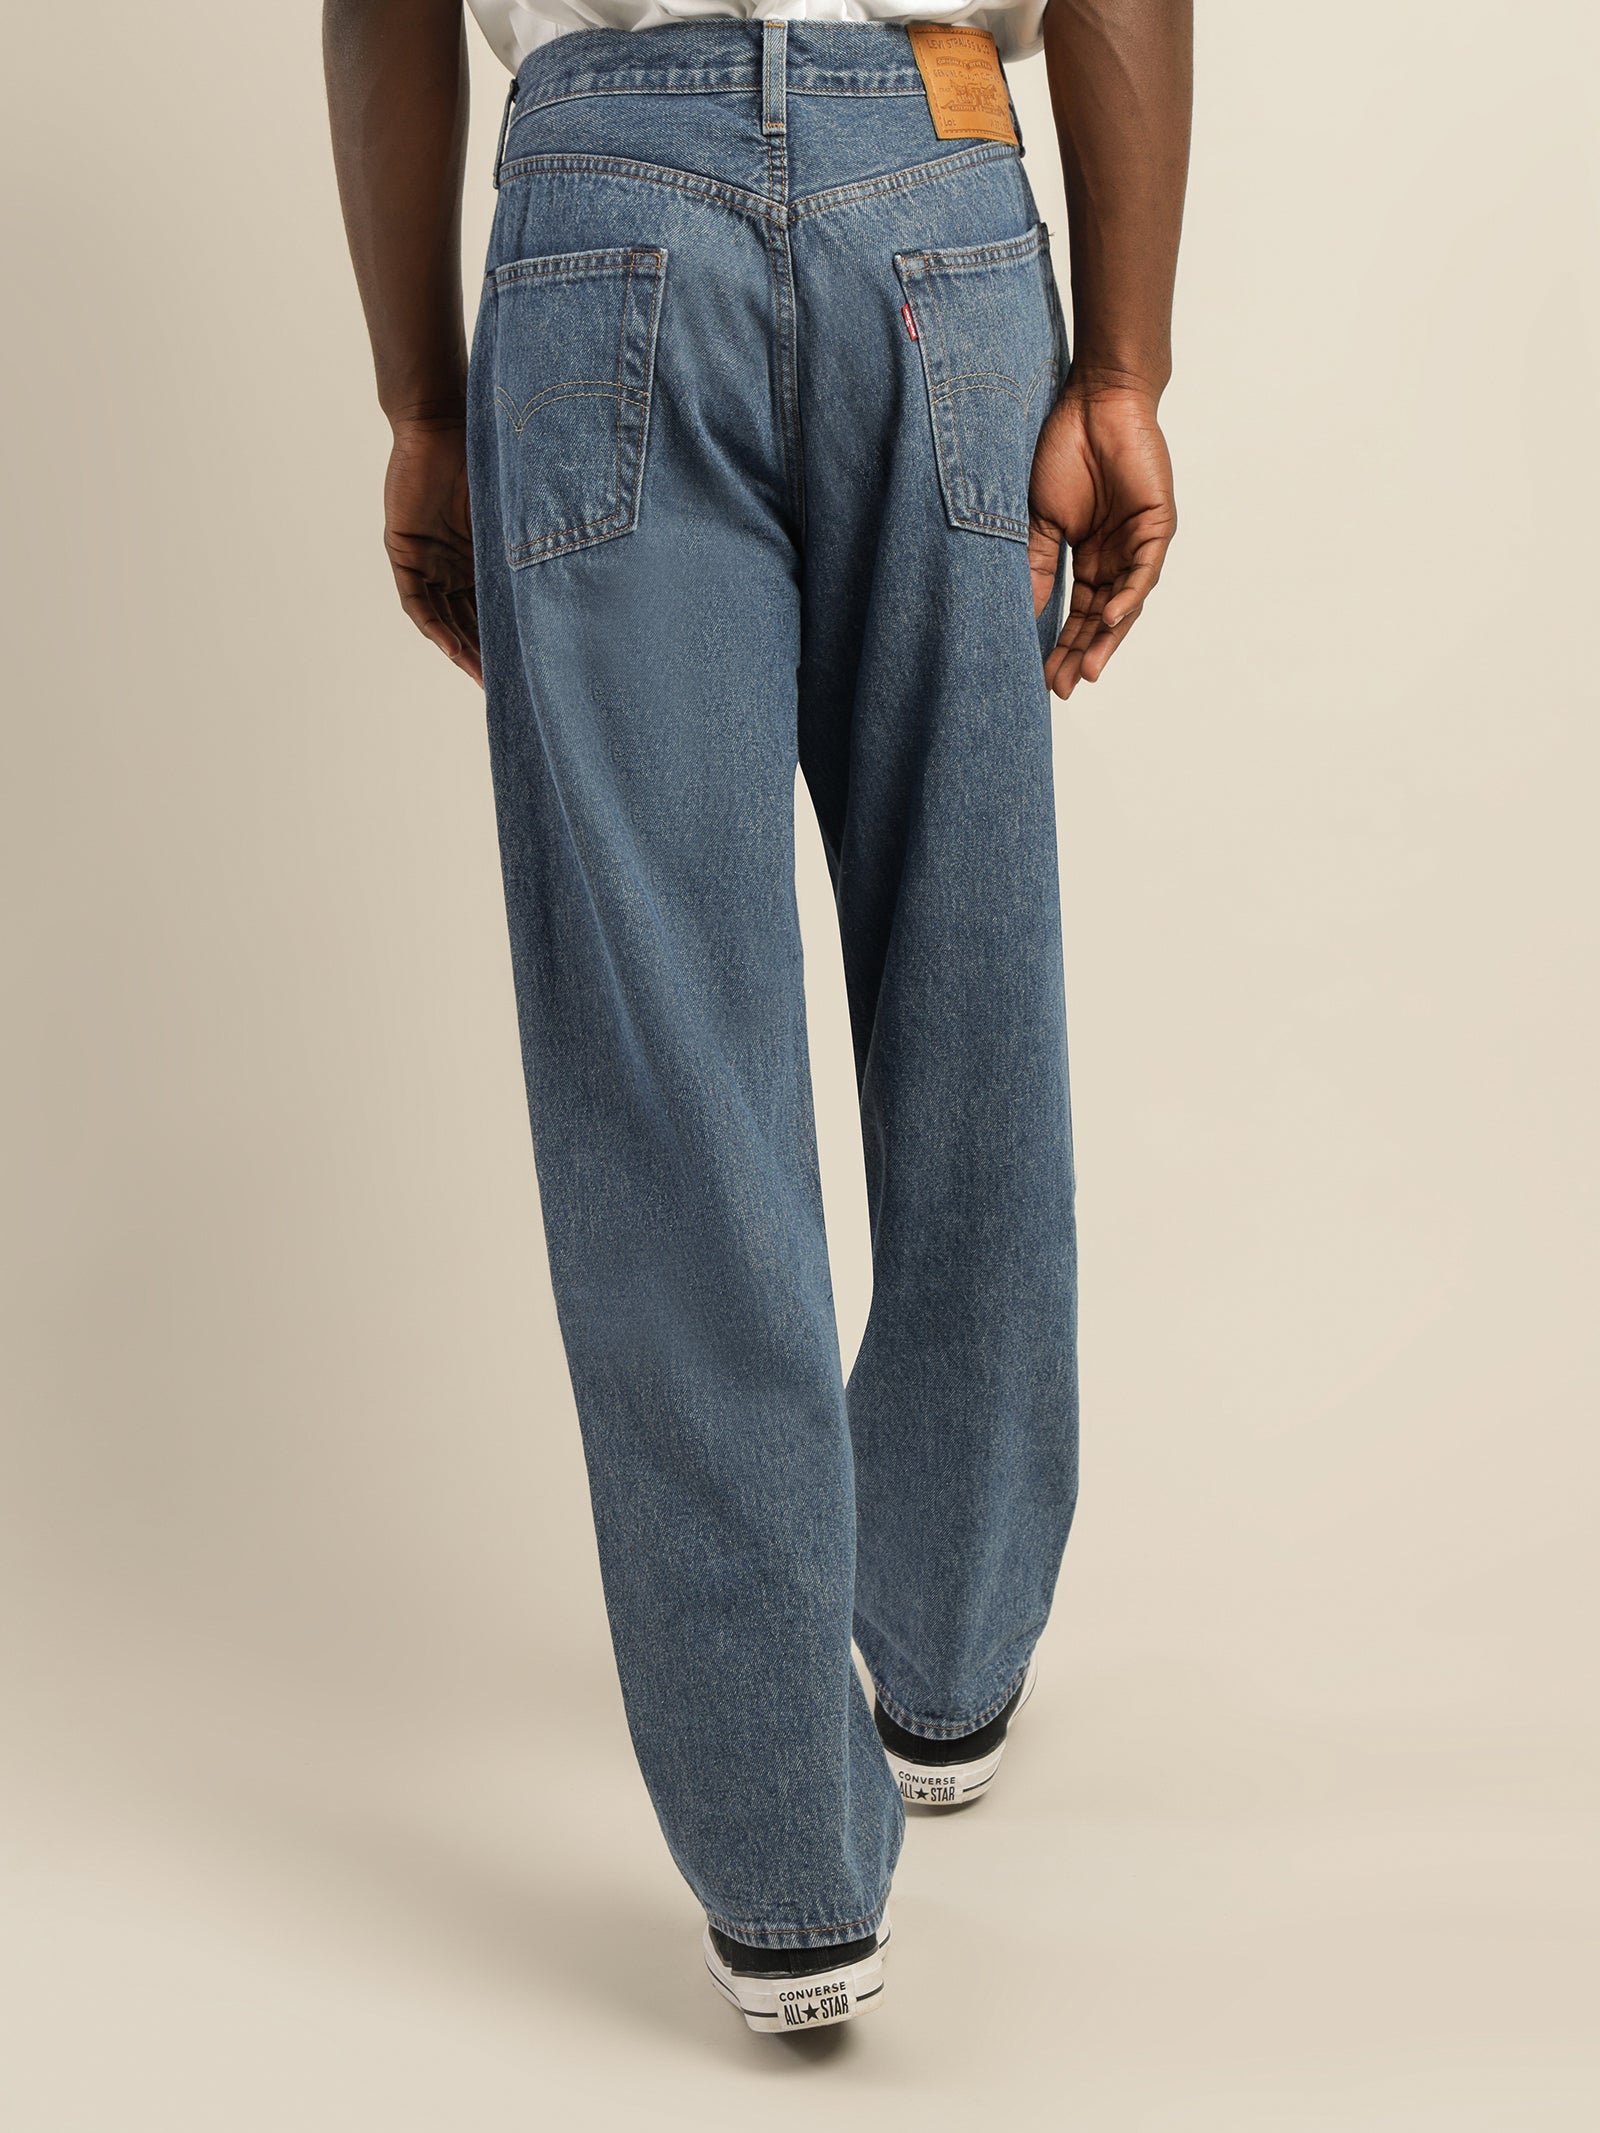 Stay Baggy Tapered Lite Jeans in Love Games - Glue Store